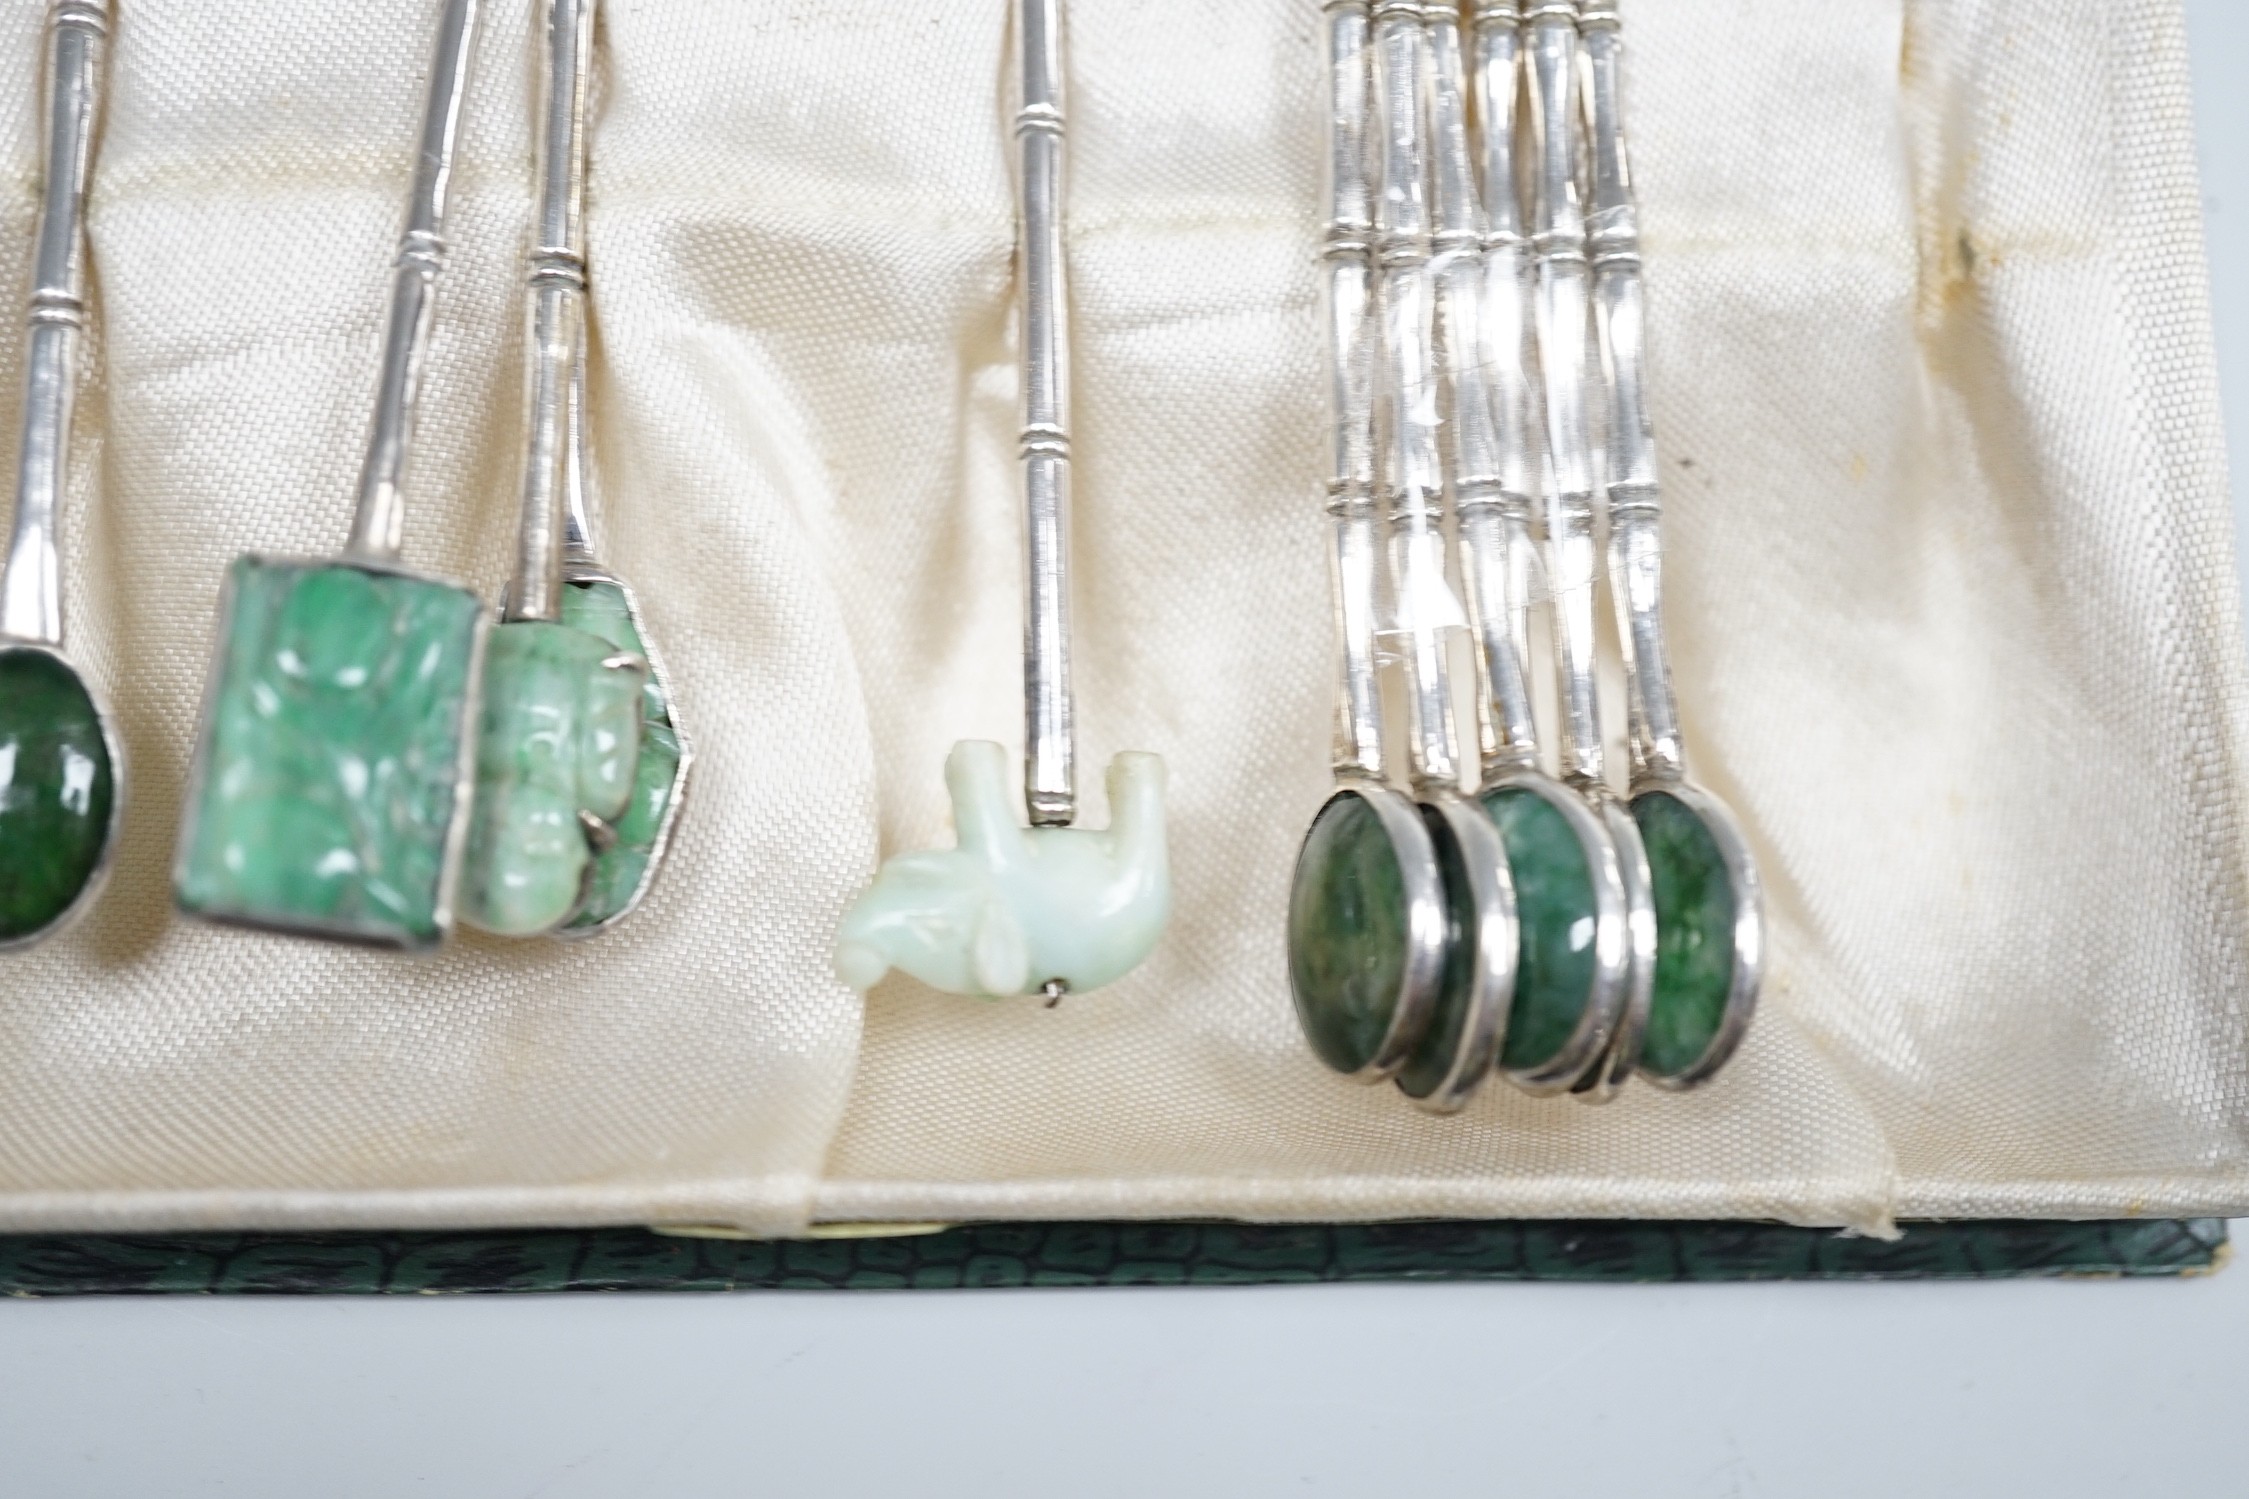 A late 19th/early 20th century Chinese Export sterling condiment by Tack Hing, Hong Kong and two sets of six Chinese white metal and jade? set coffee spoons, by Wai Kee, 83mm